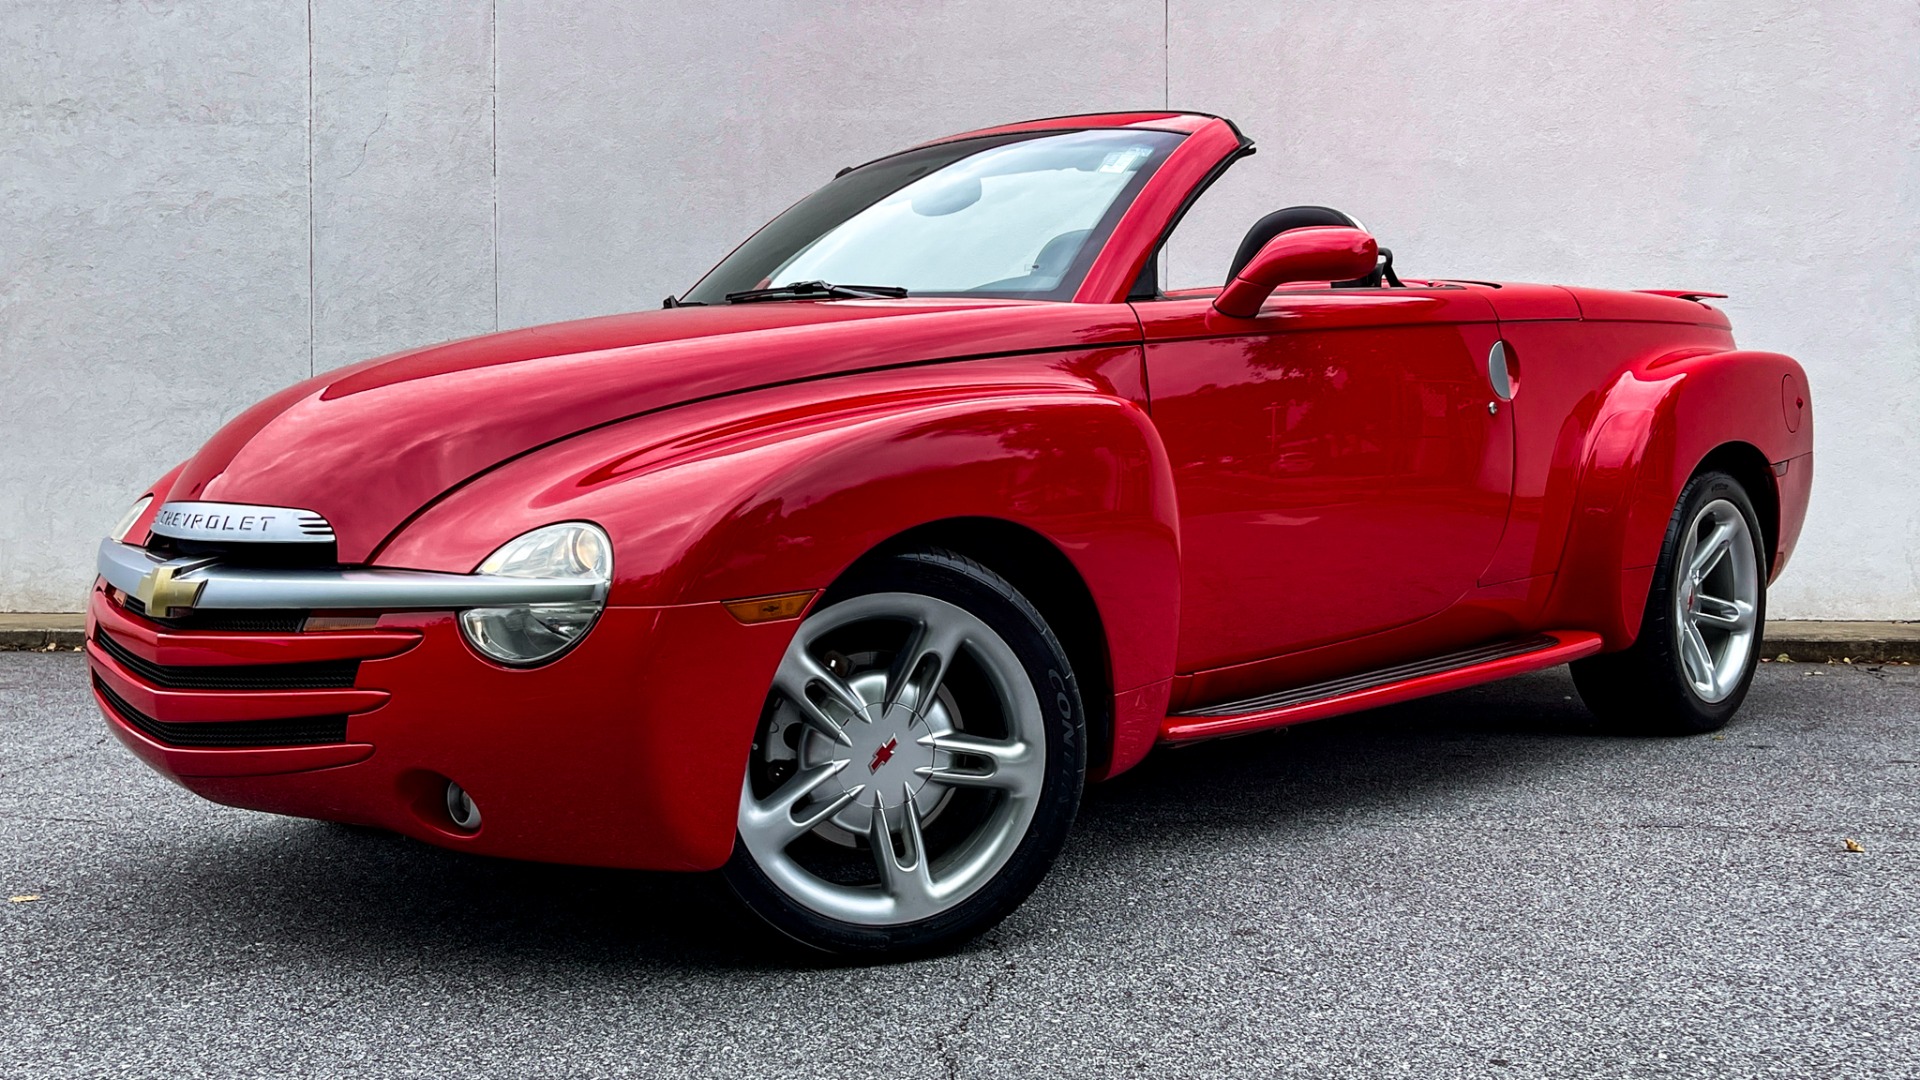 Used 2004 Chevrolet SSR LS / CONVERTIBLE / 5.3L V8 / LEATHER / HEATED SEATS / BACKUP CAMERA for sale Sold at Formula Imports in Charlotte NC 28227 1